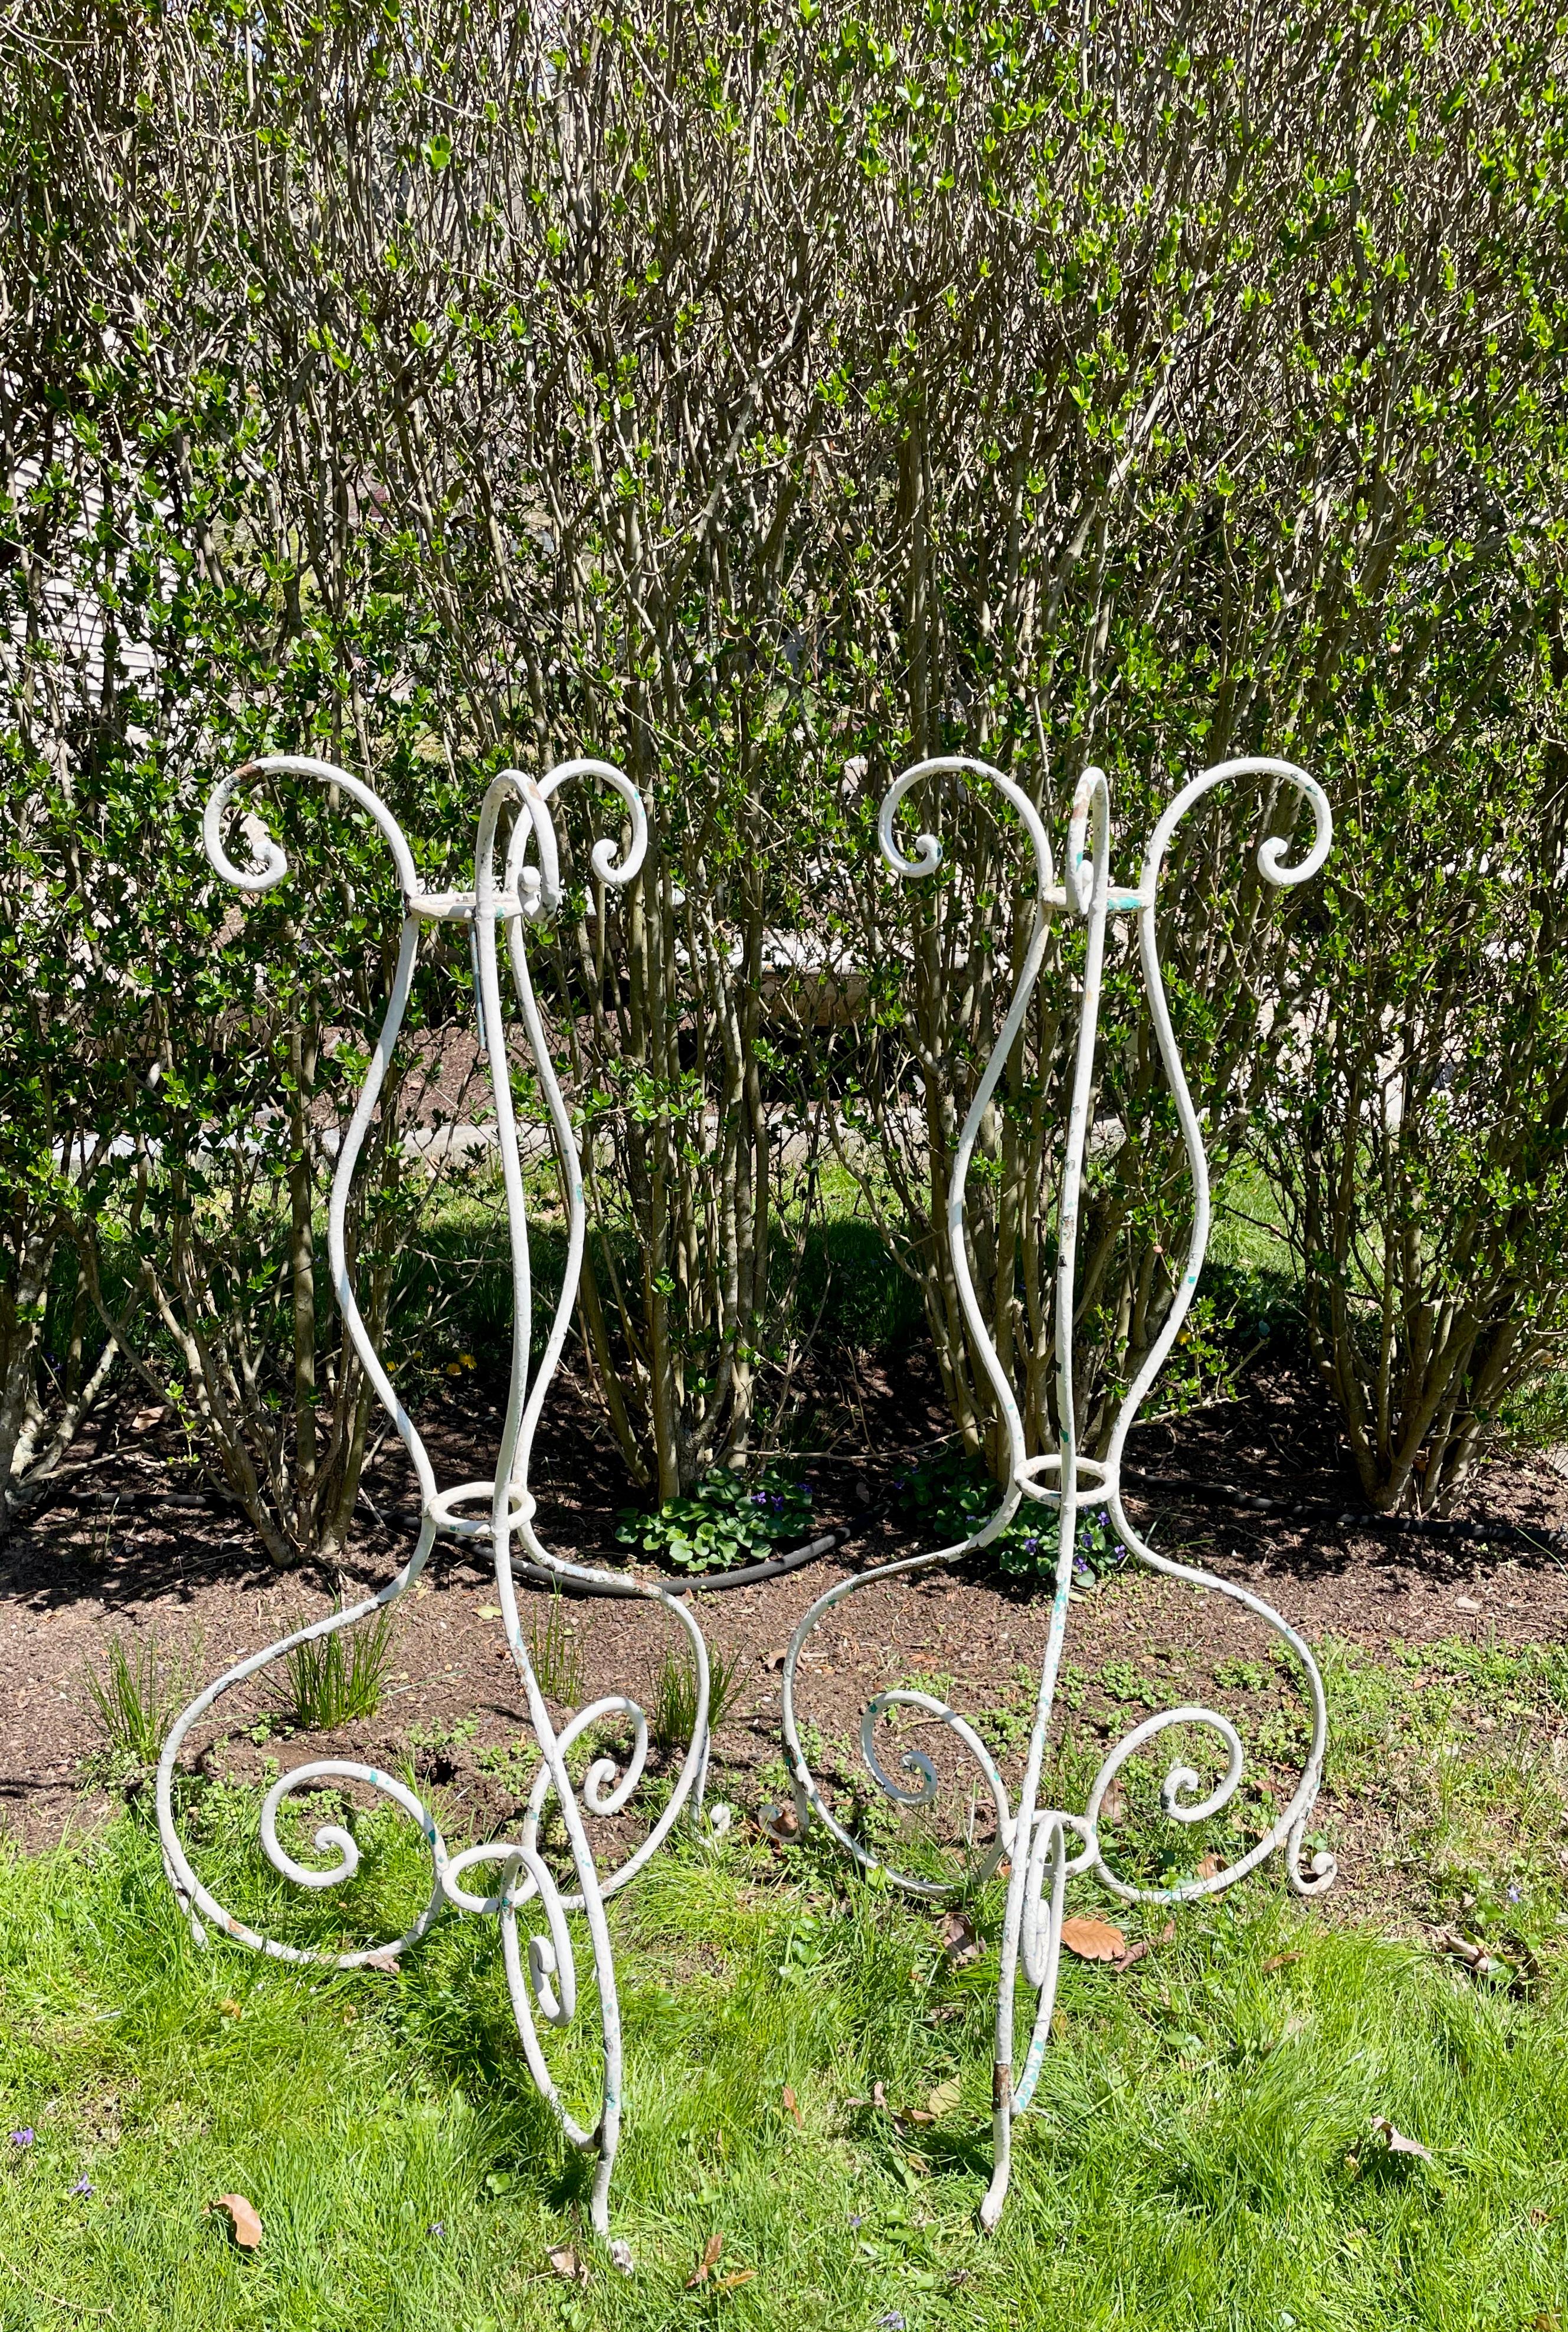 Pieces that add height to your terrace or garden are always in high demand and we found these lovely 19th C wrought iron plant stands near St. Émilion. Hand-wrought and in old slightly-chippy white over green paint with small areas of surface